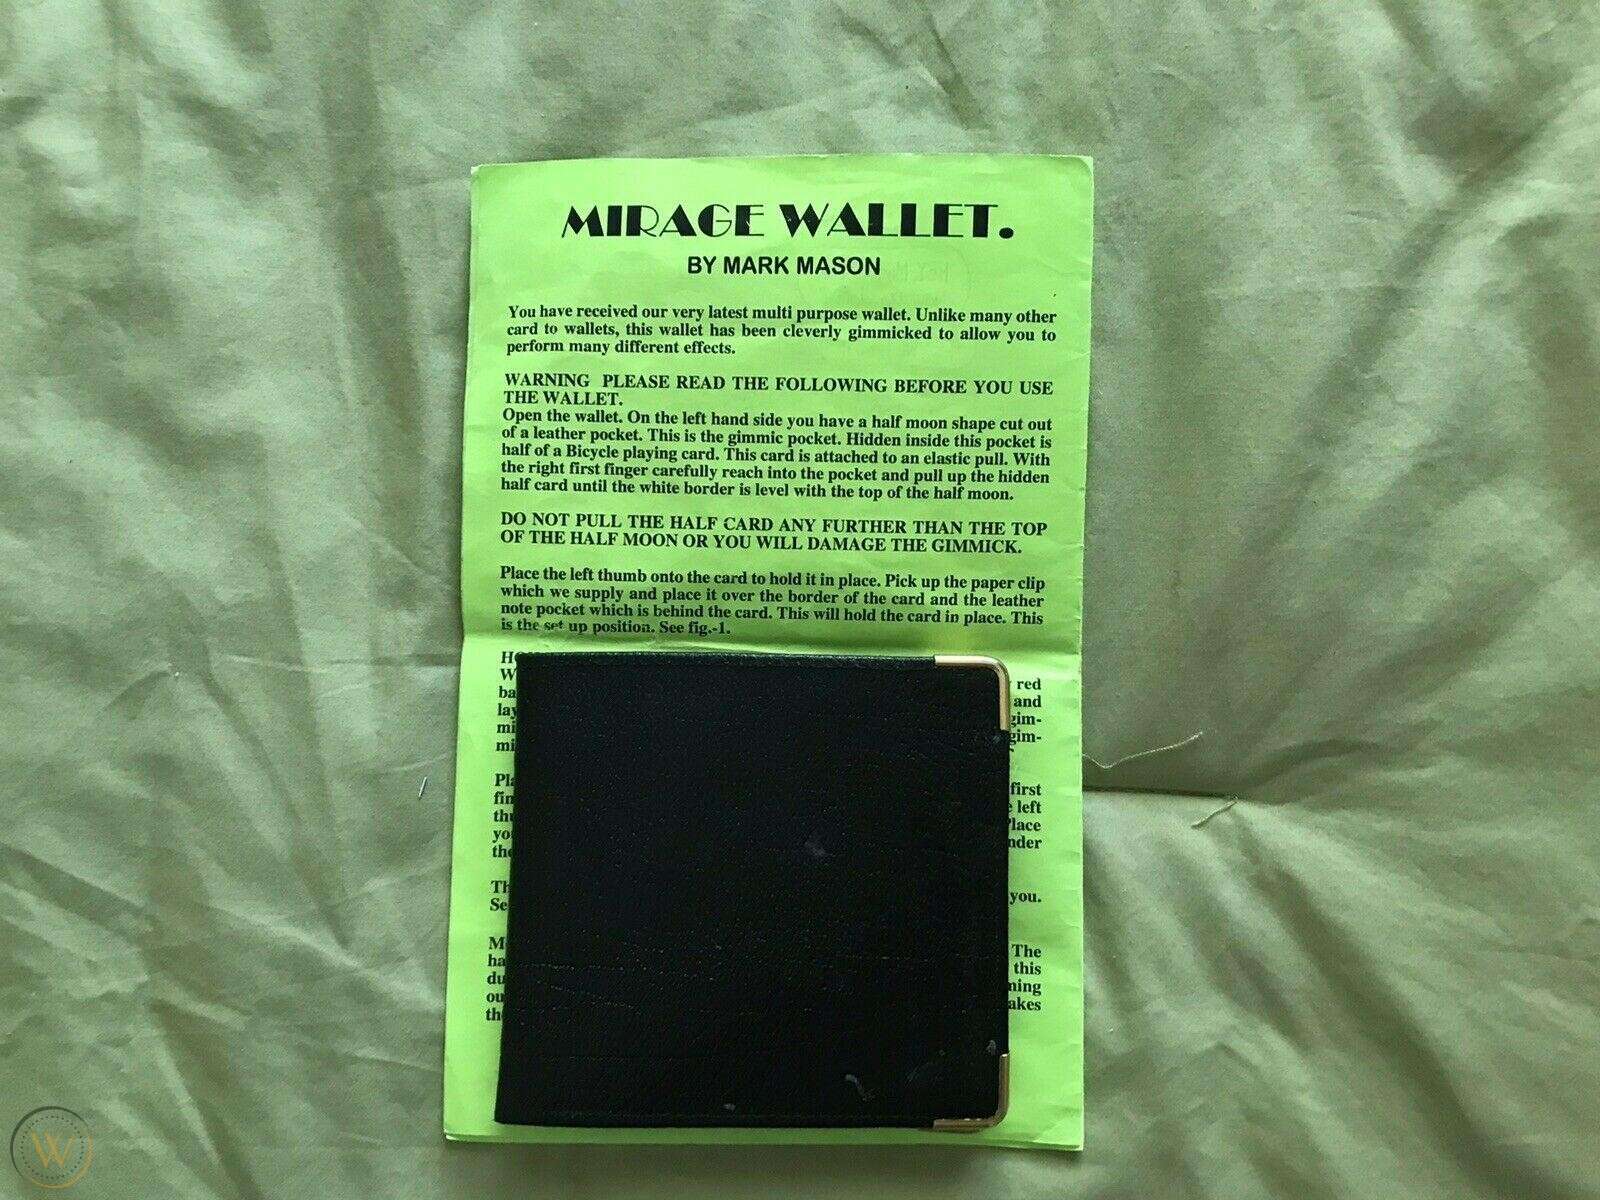 Mirage Wallet by Mark Mason shown closed on yellow instruction sheet